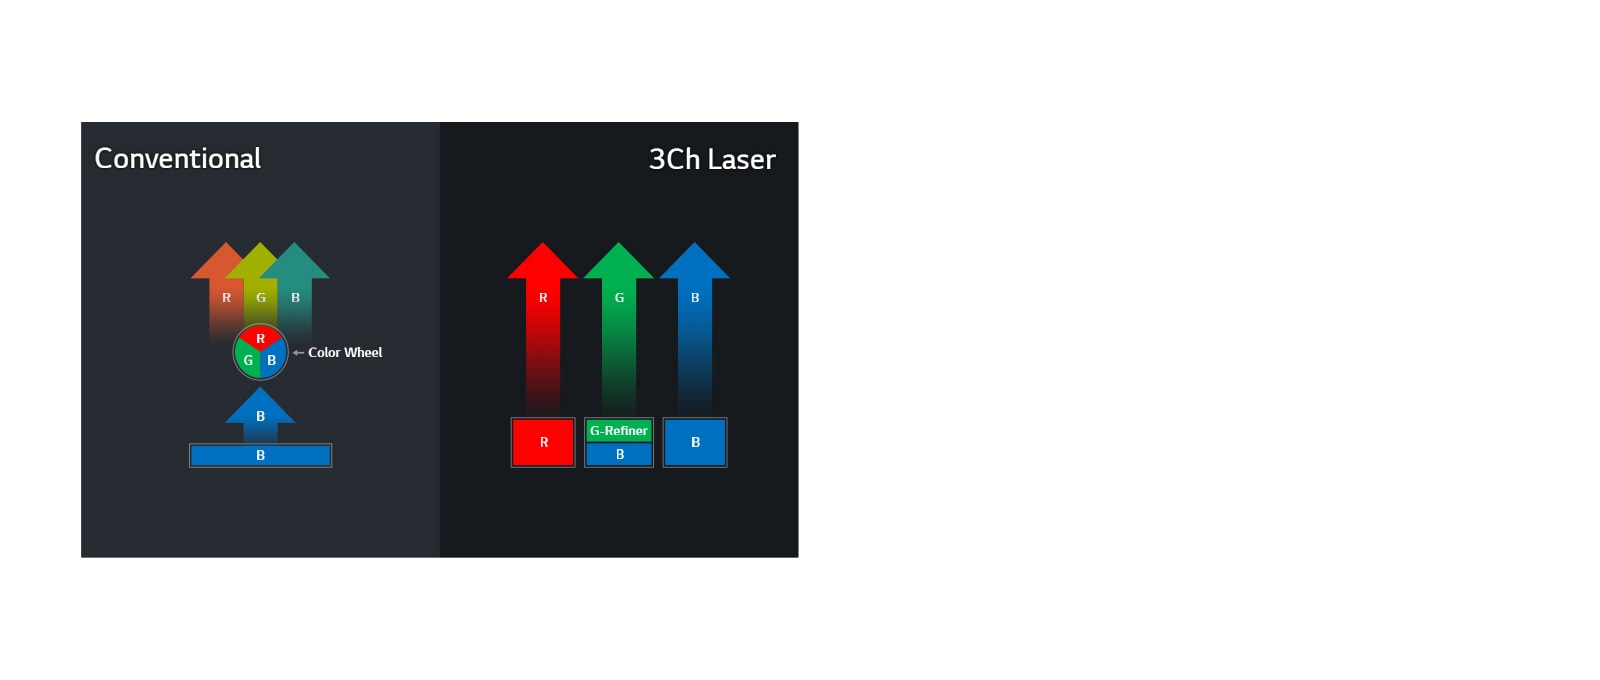 3Ch Laser with Wheel-less Tech1